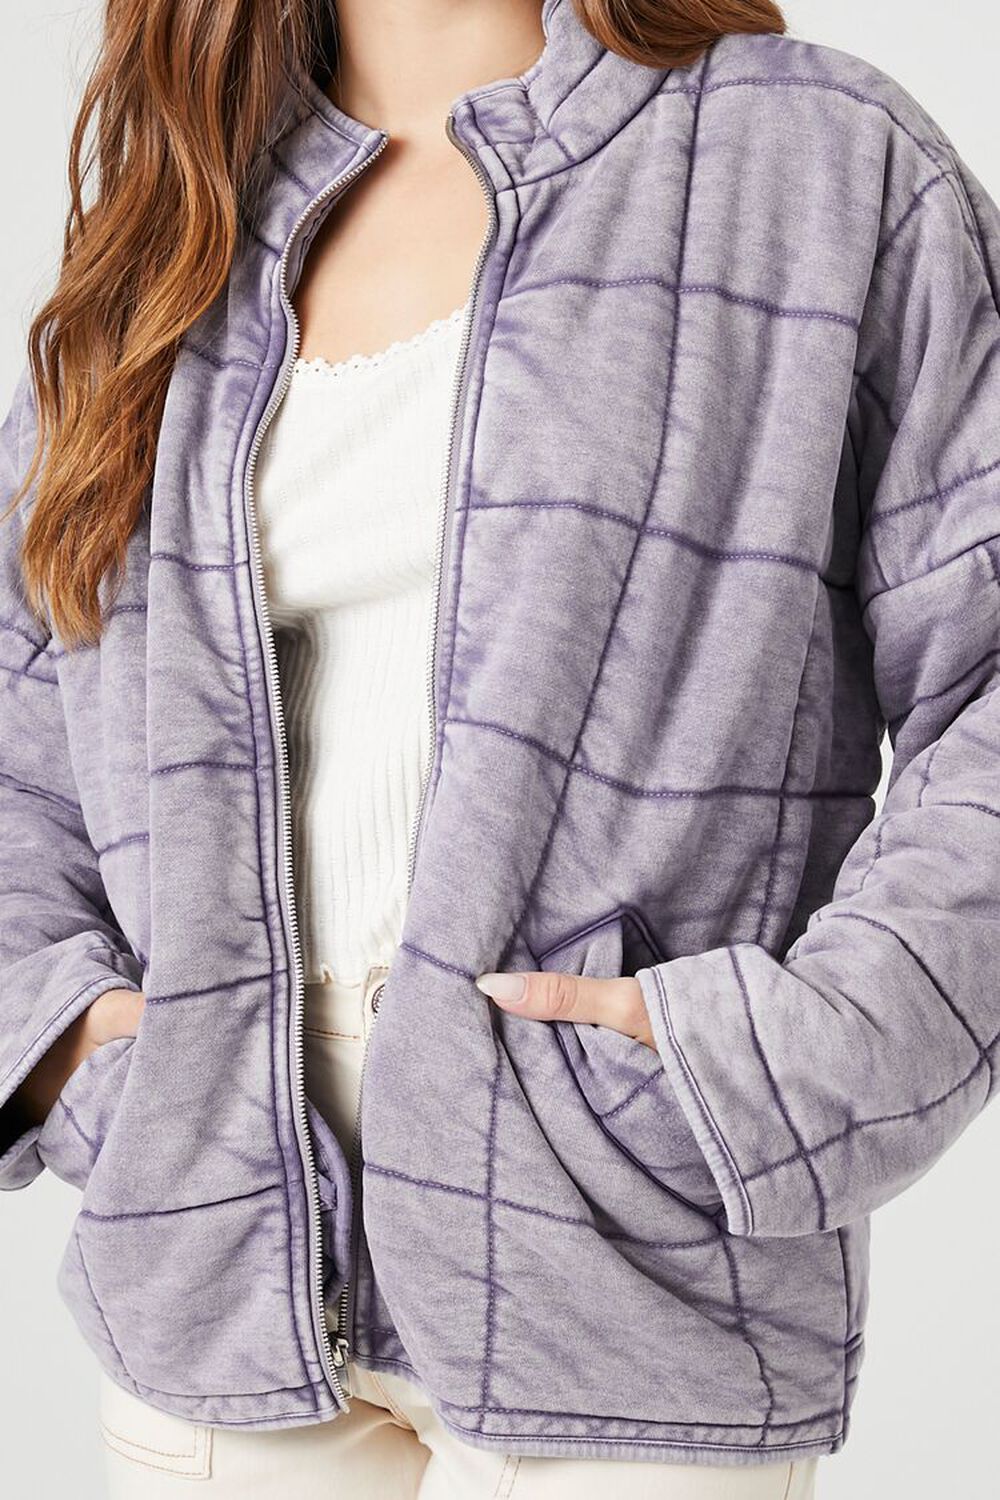 Forever 21 Women's Quilted Zip-Up Jacket